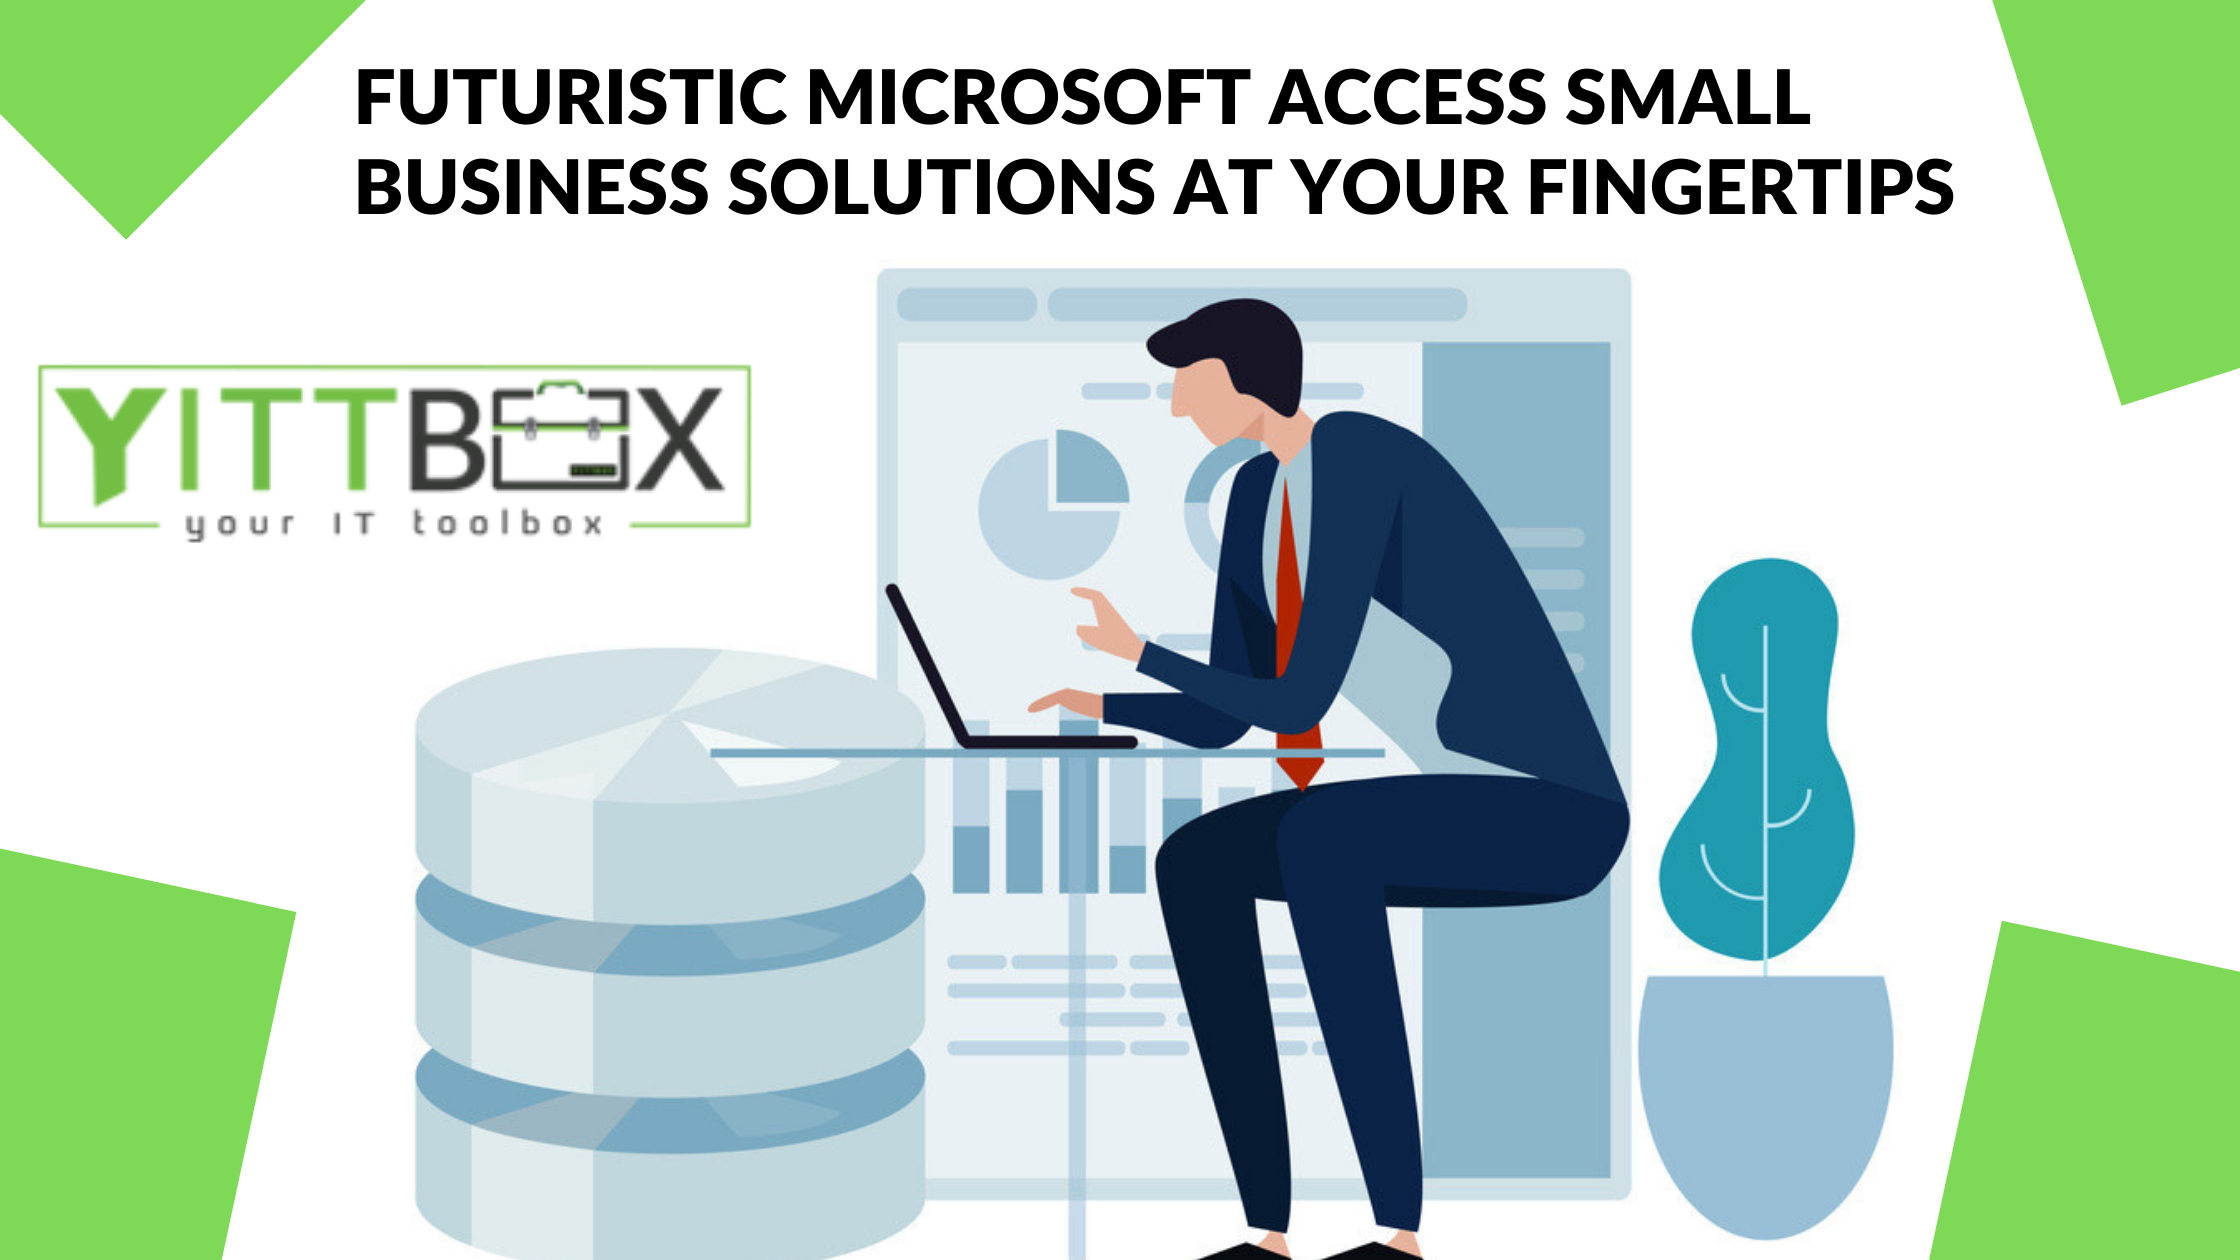 Futuristic Microsoft Access Small Business Solutions at Your Fingertips